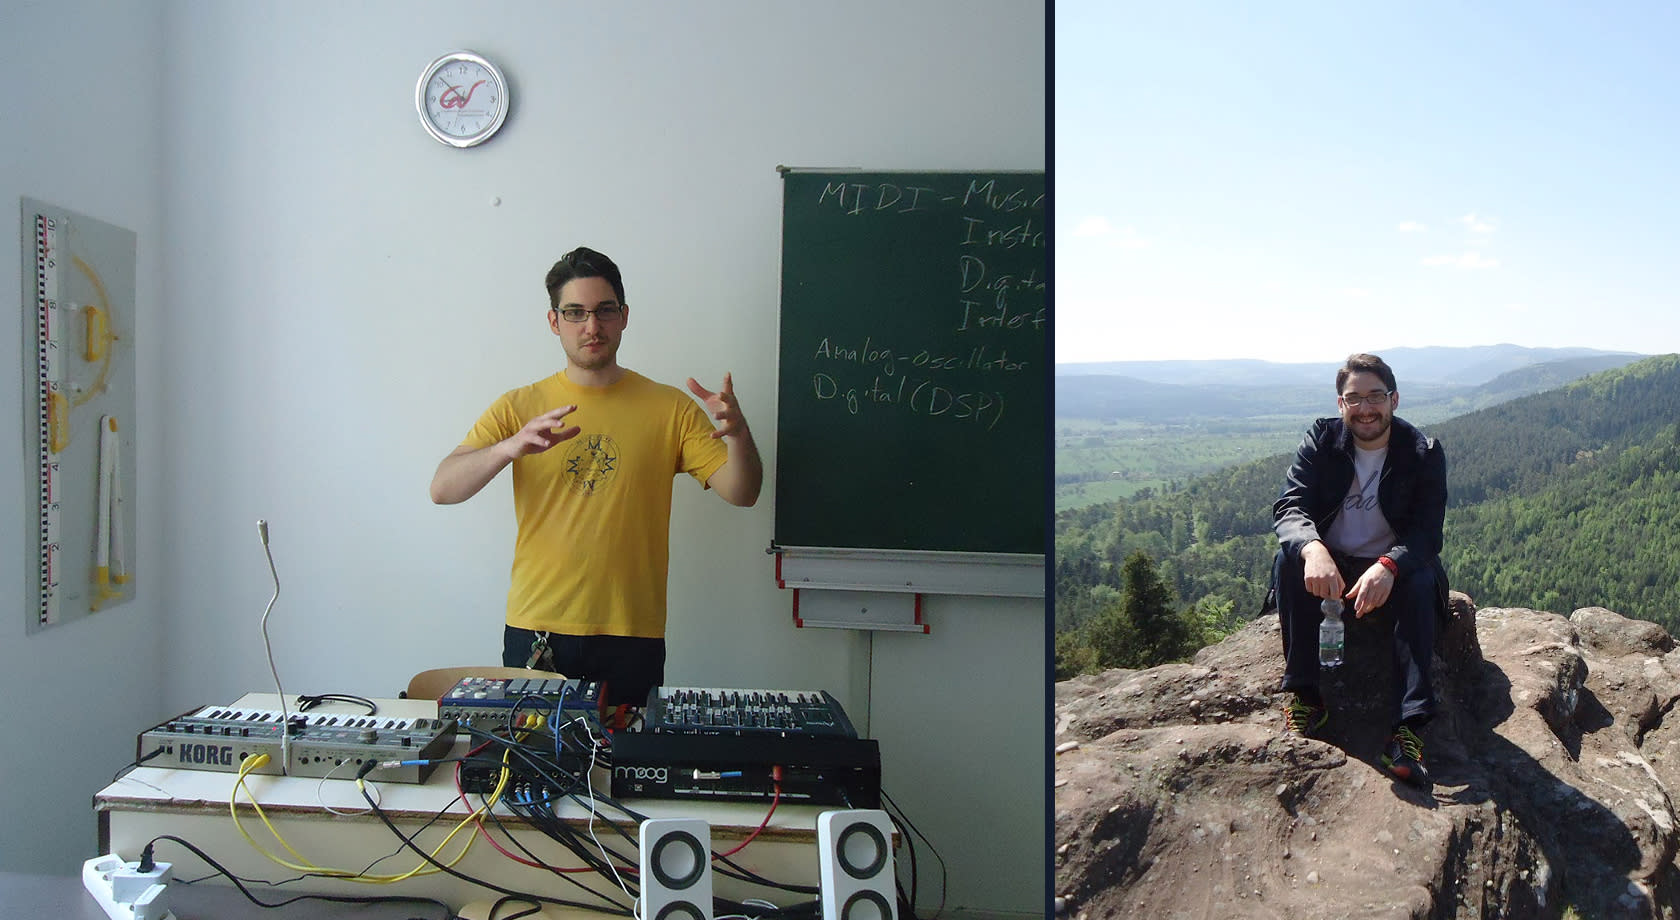 Luke teaching a class in Germany (left) | Luke visiting the town of Saverne in France (right)